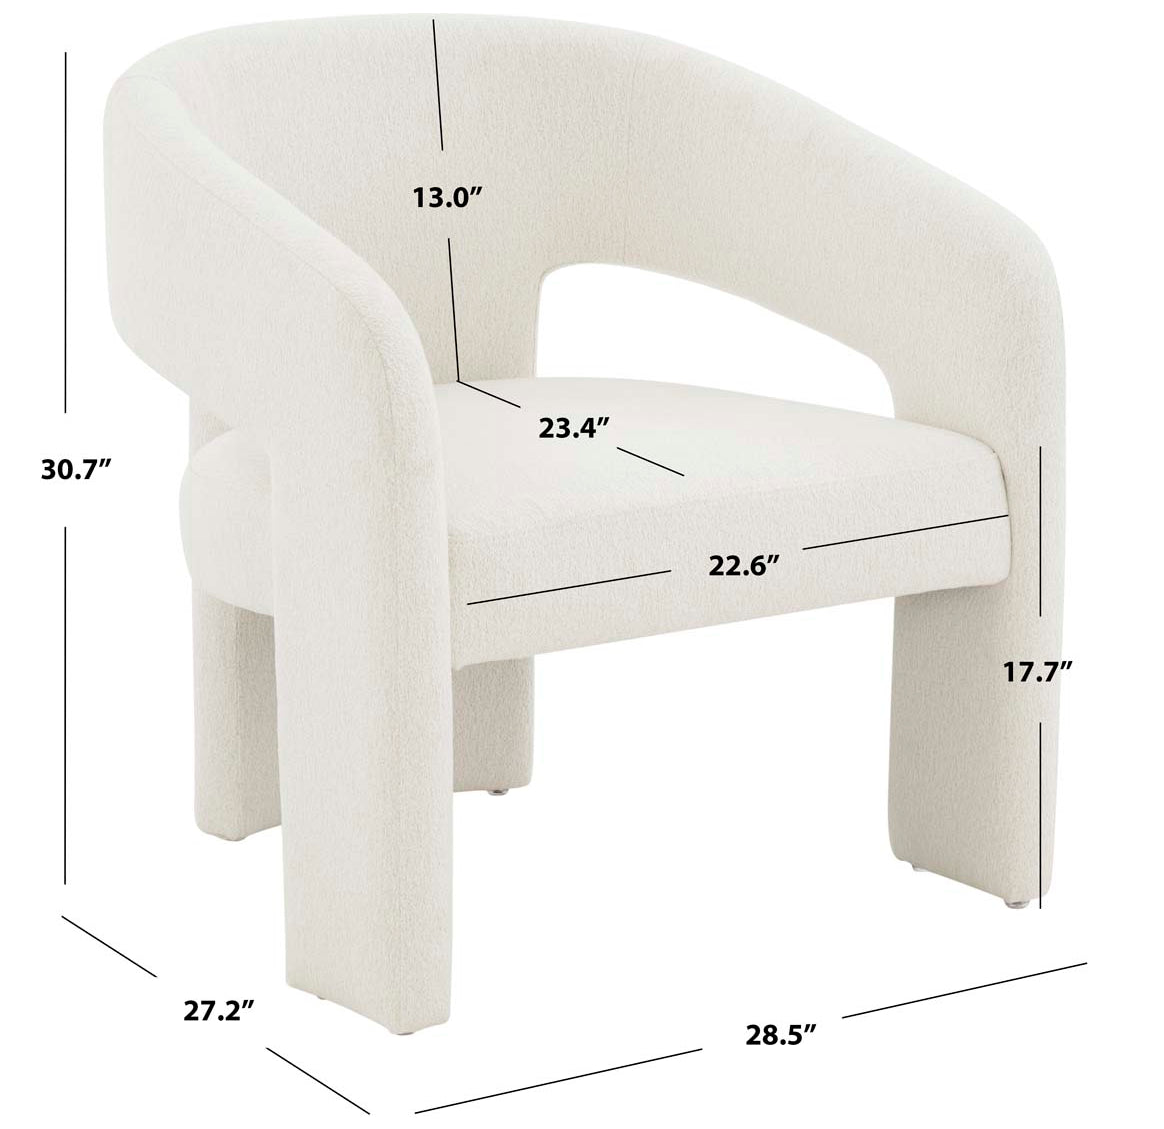 Safavieh Couture Roseanna Modern Accent Chair - Ivory